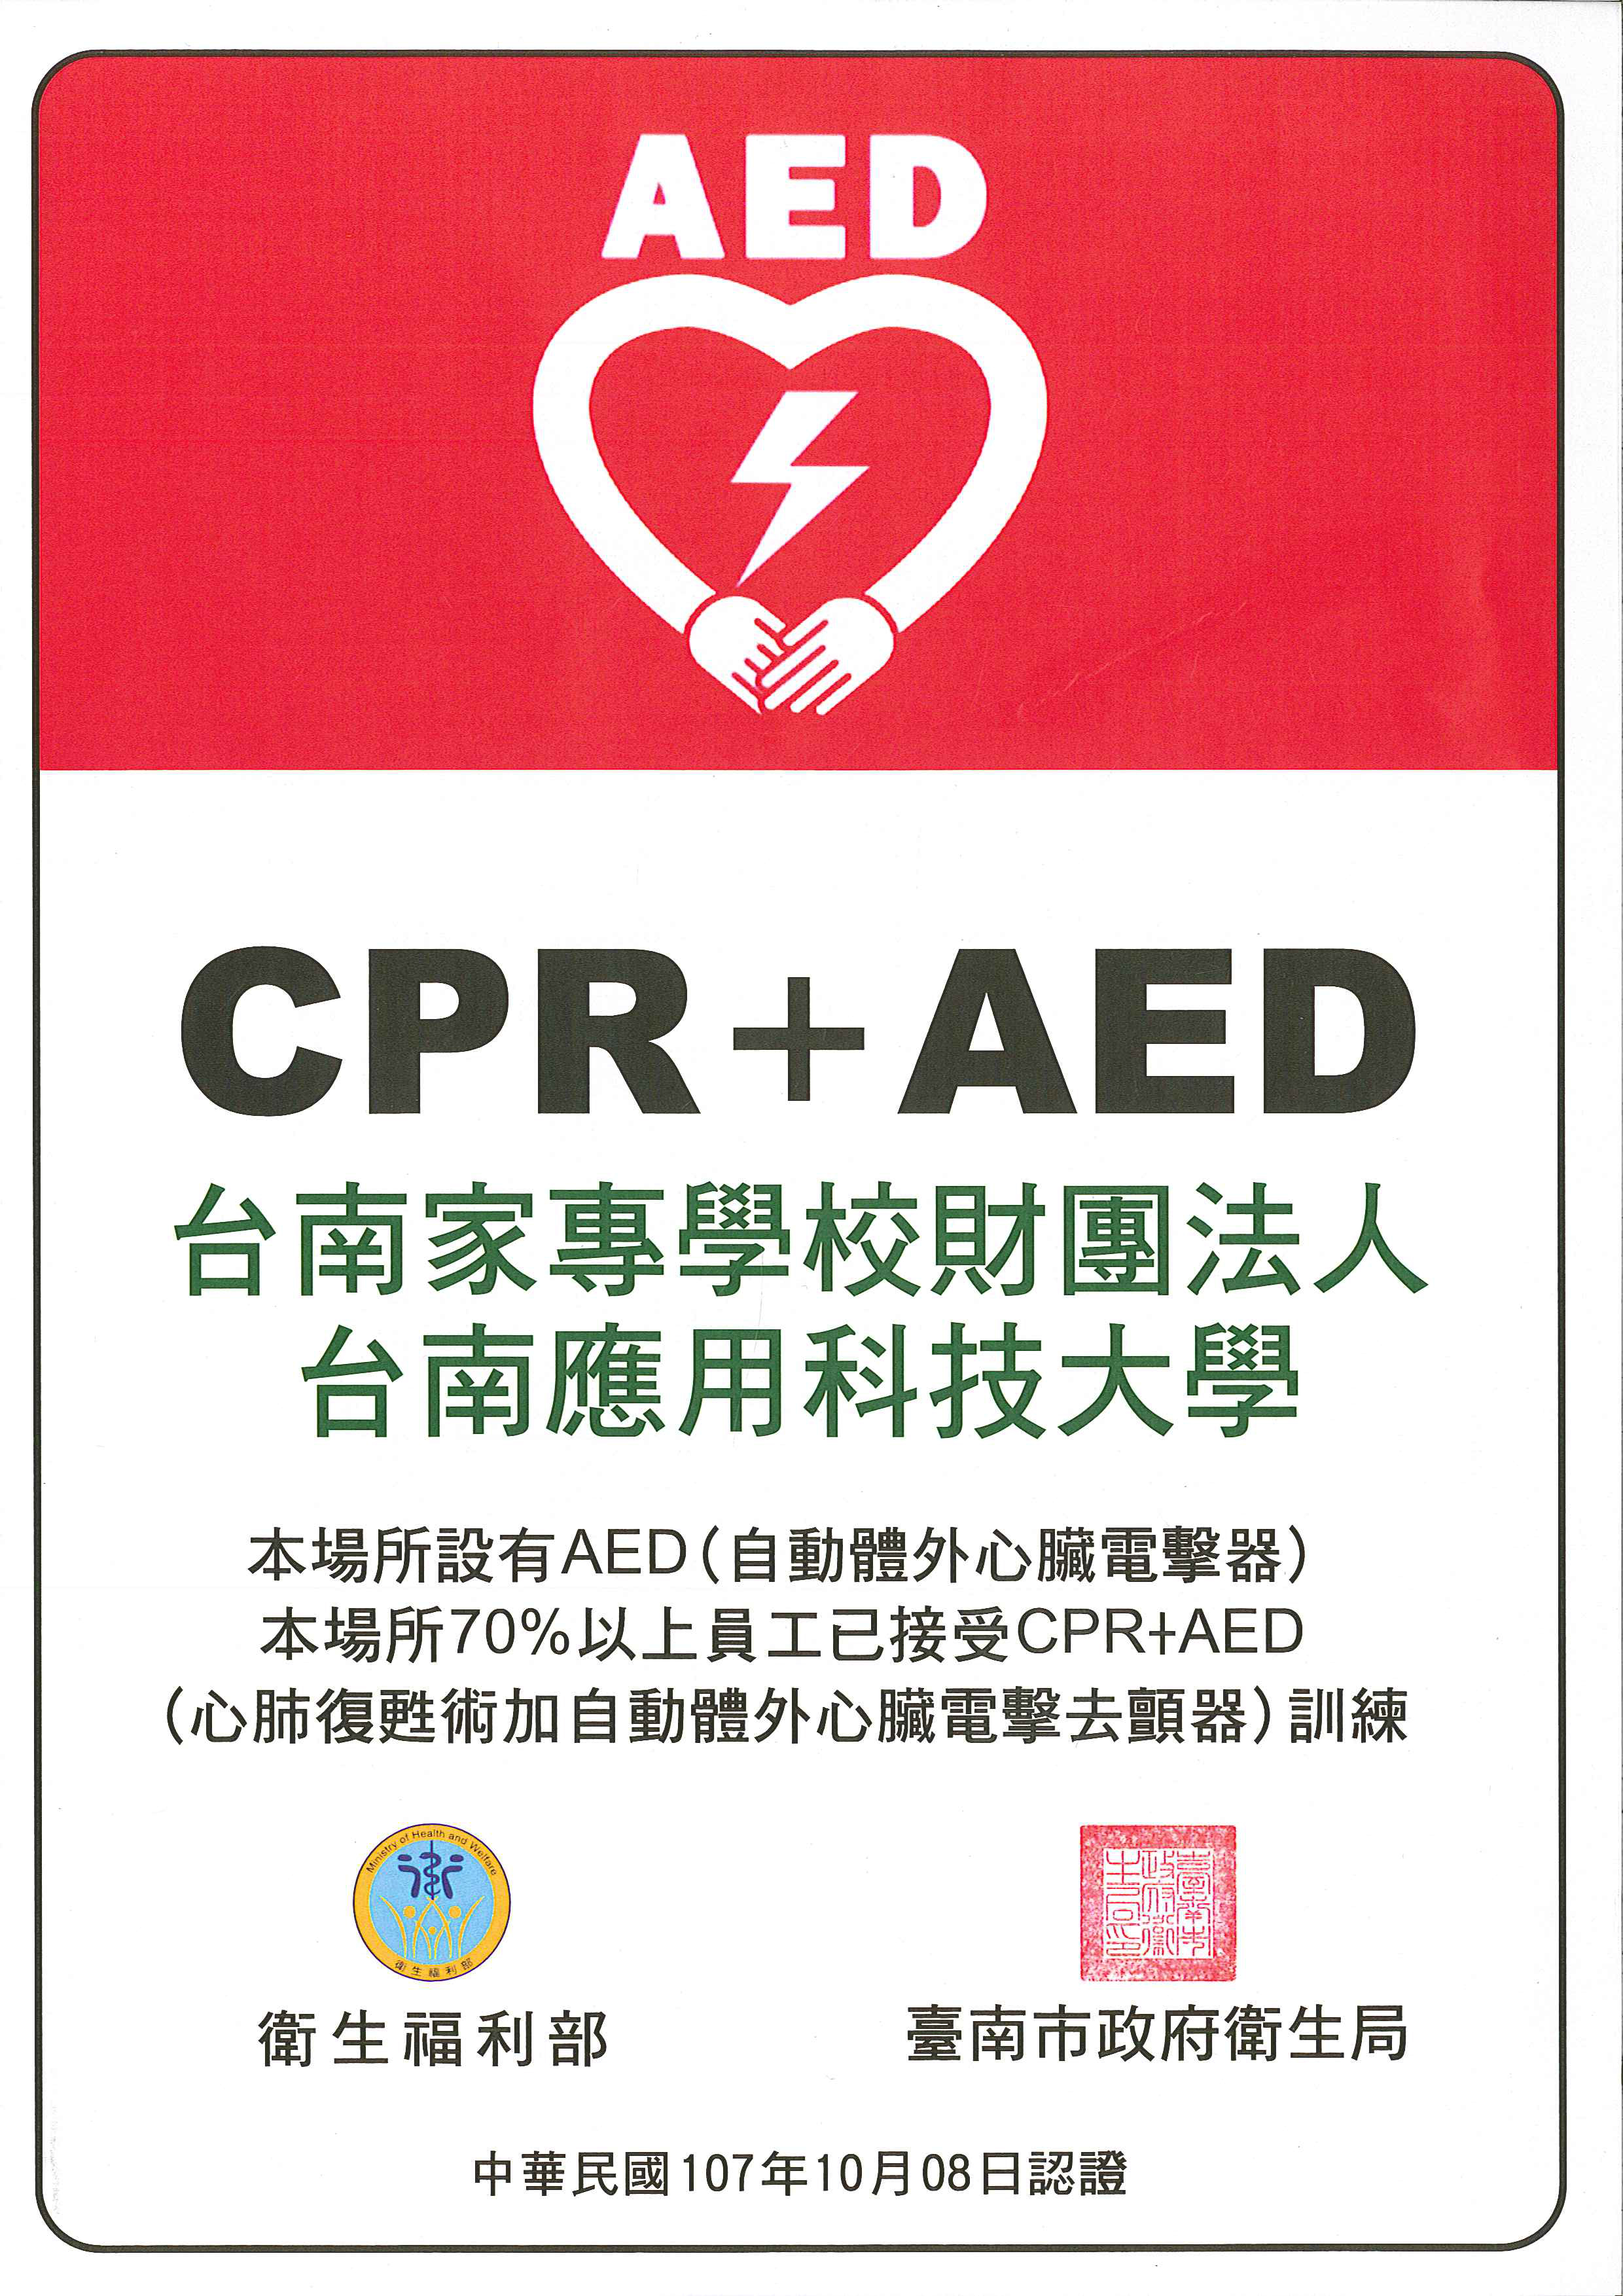 AED safe place certification